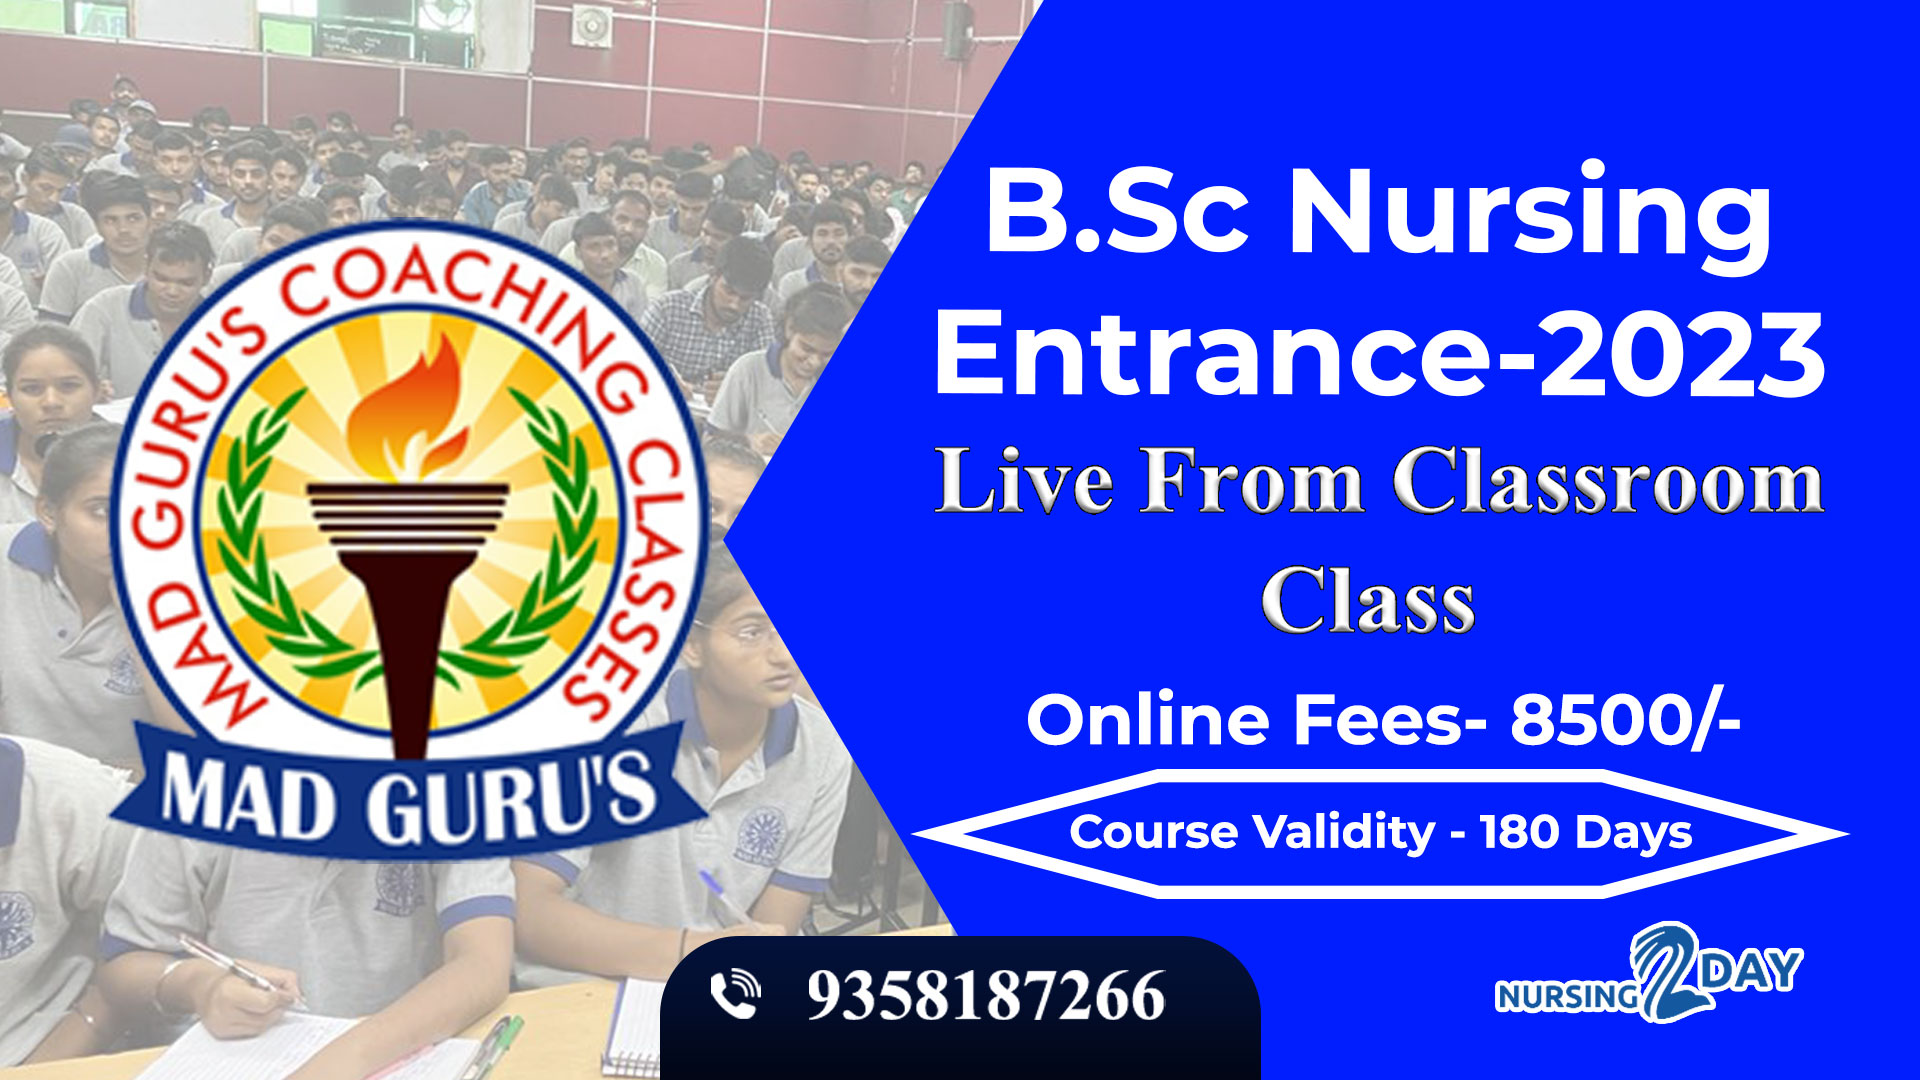 ESIC- 2021 Test Series (3 months) only 499 Rs